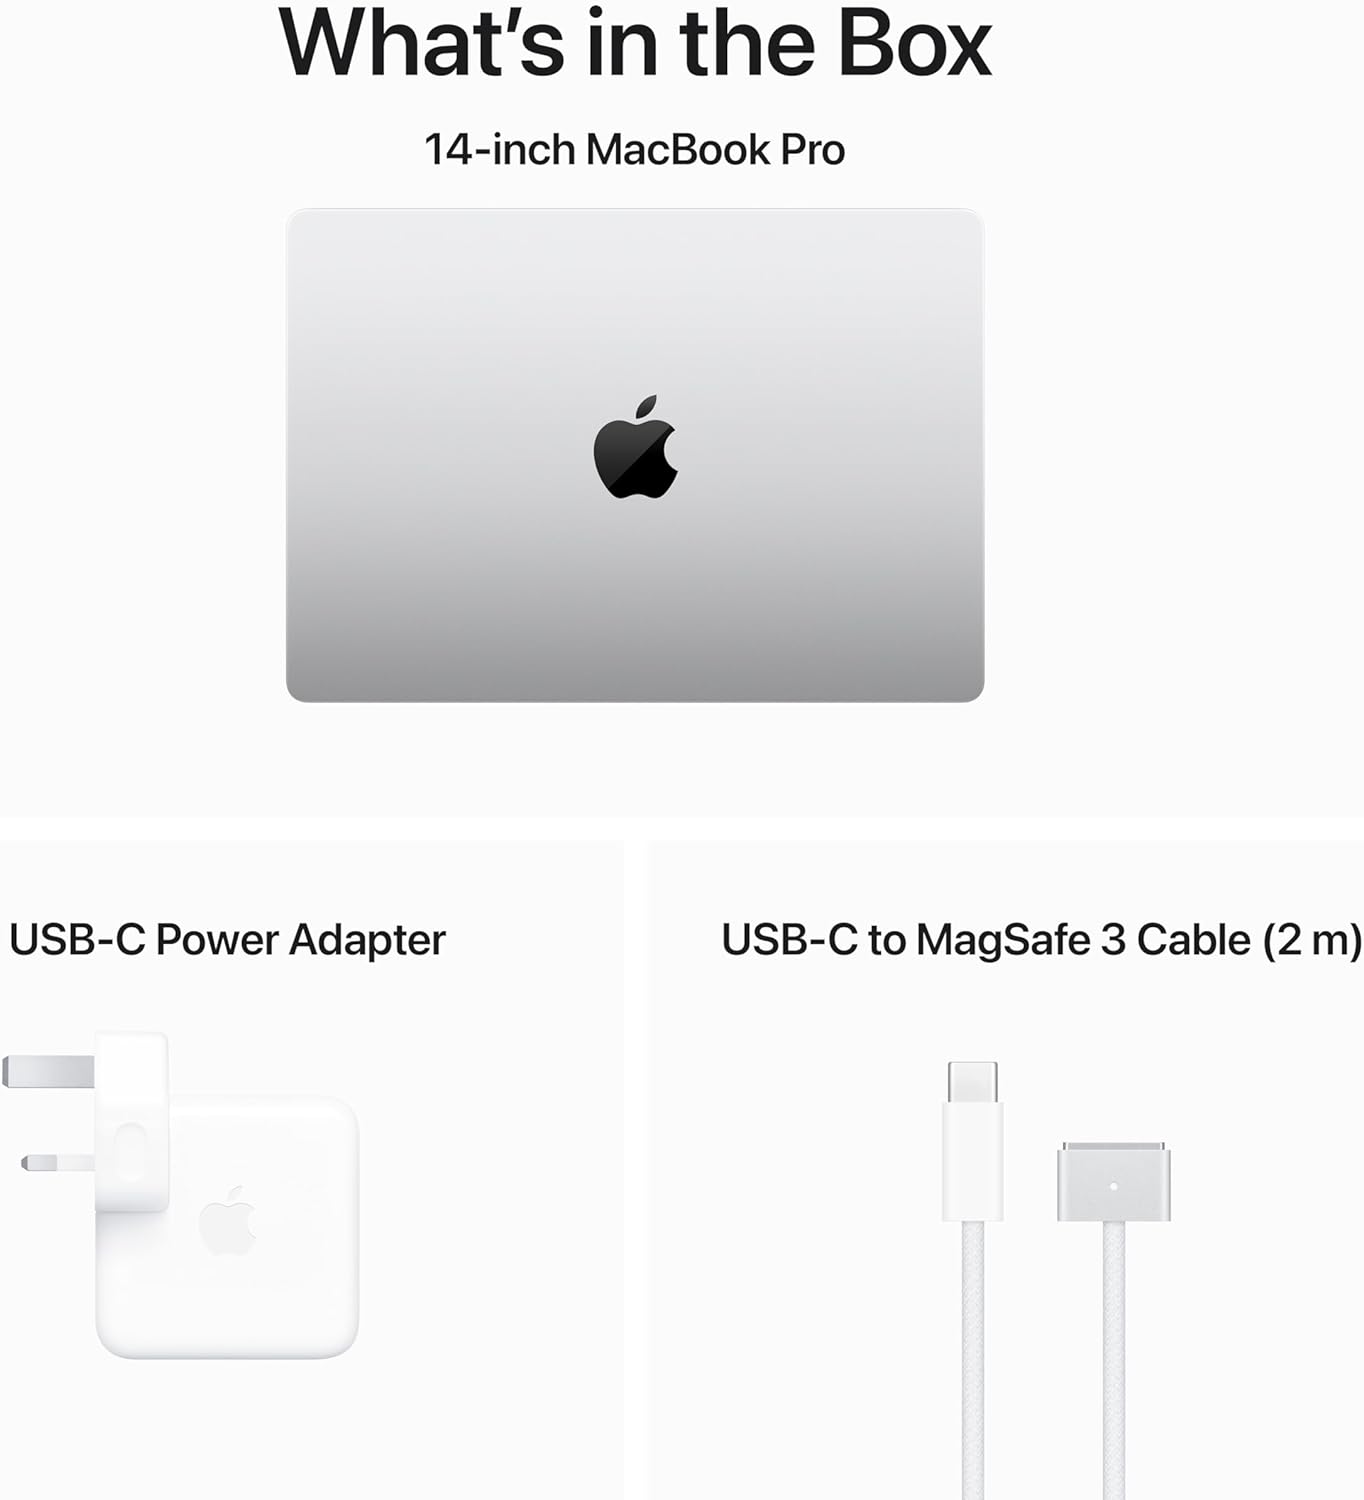 SKU: 0195949015519, Barcode: 195949015519 - Apple 2023 MacBook Pro (14-inch) - Silver: Connect it all with MagSafe, Thunderbolt ports, and more.